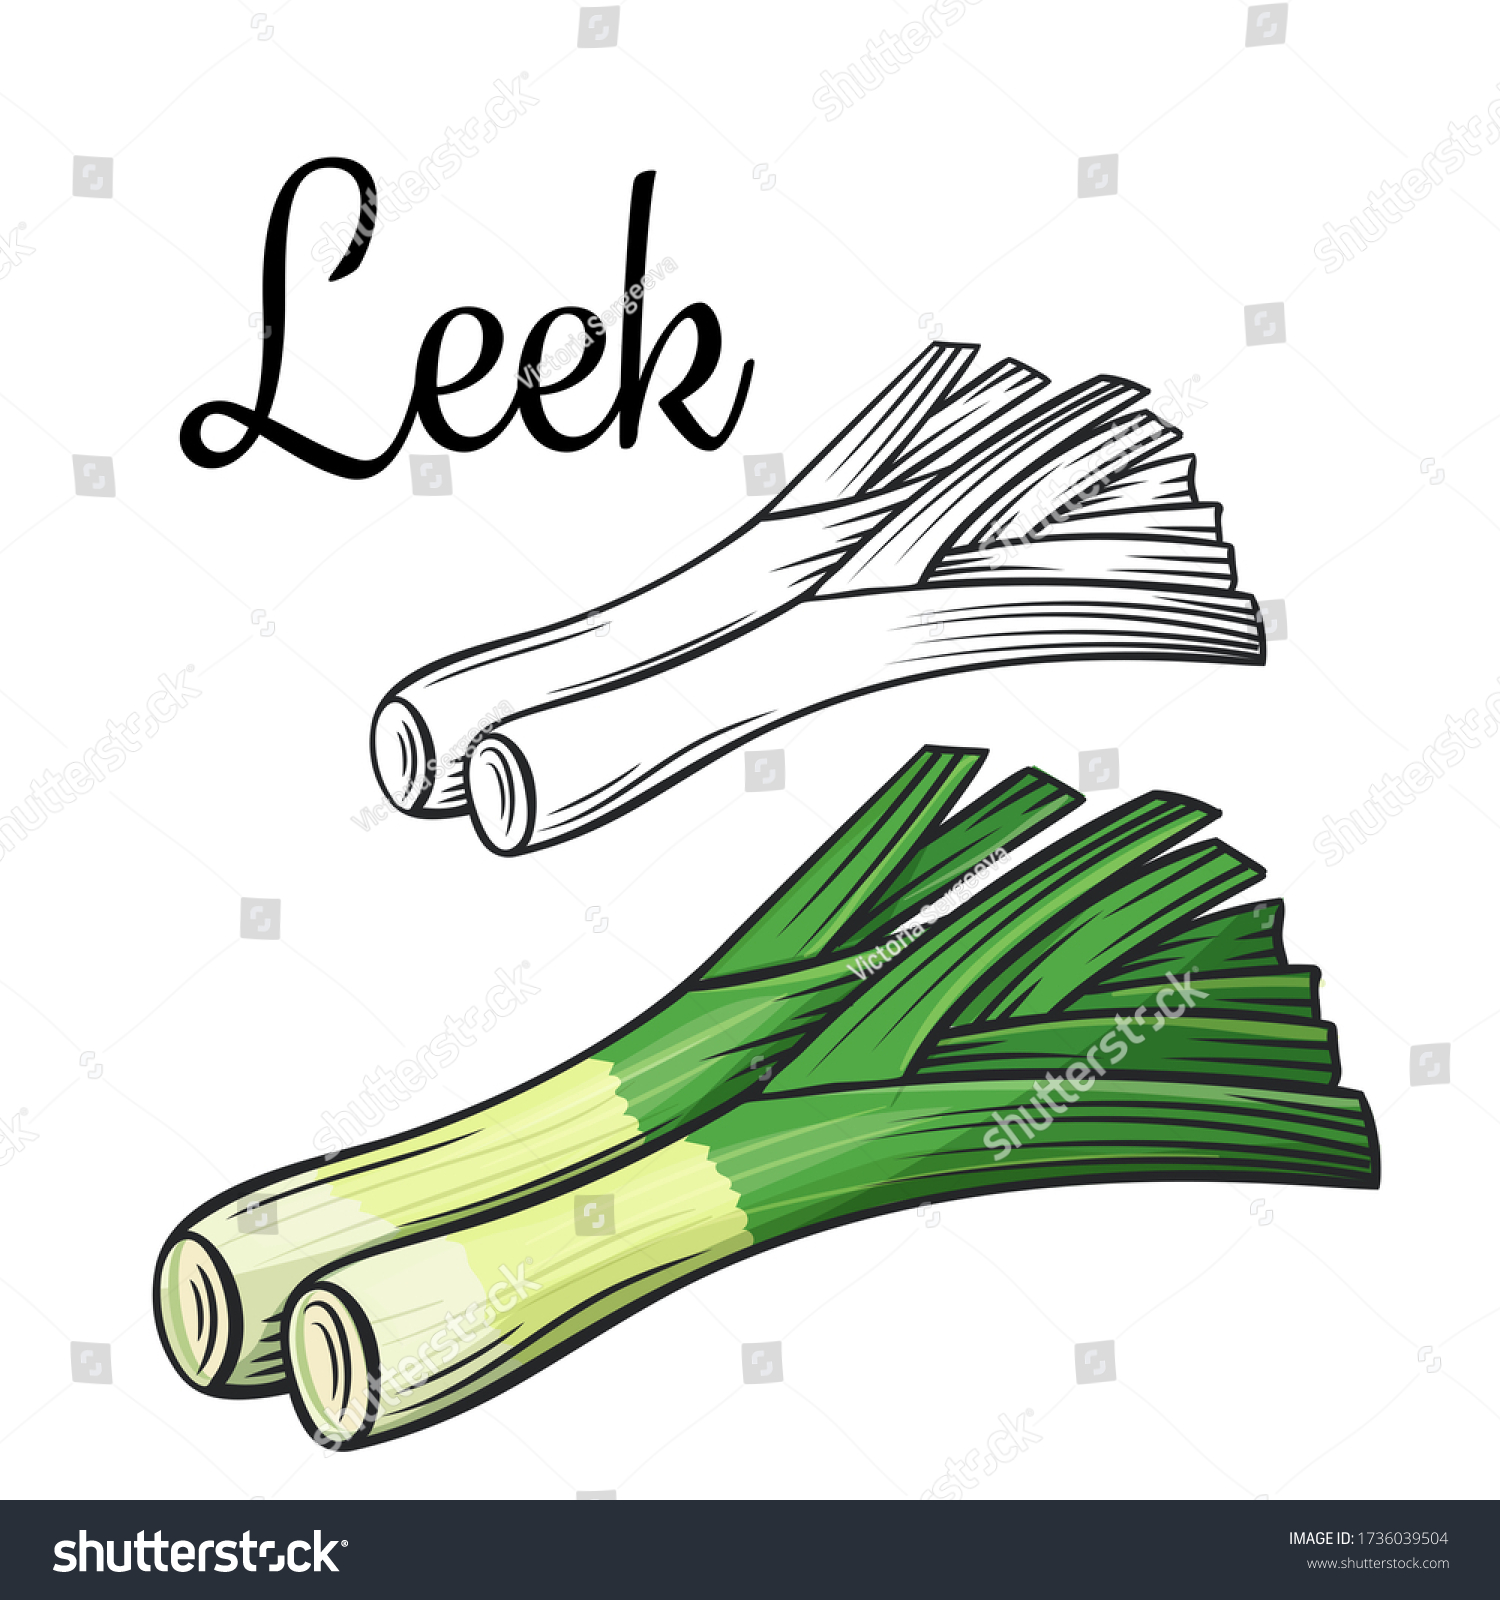 Leek vector drawing icon. Vegetable in retro style, outline illustration of farm product for design advertising products shop or market. #1736039504